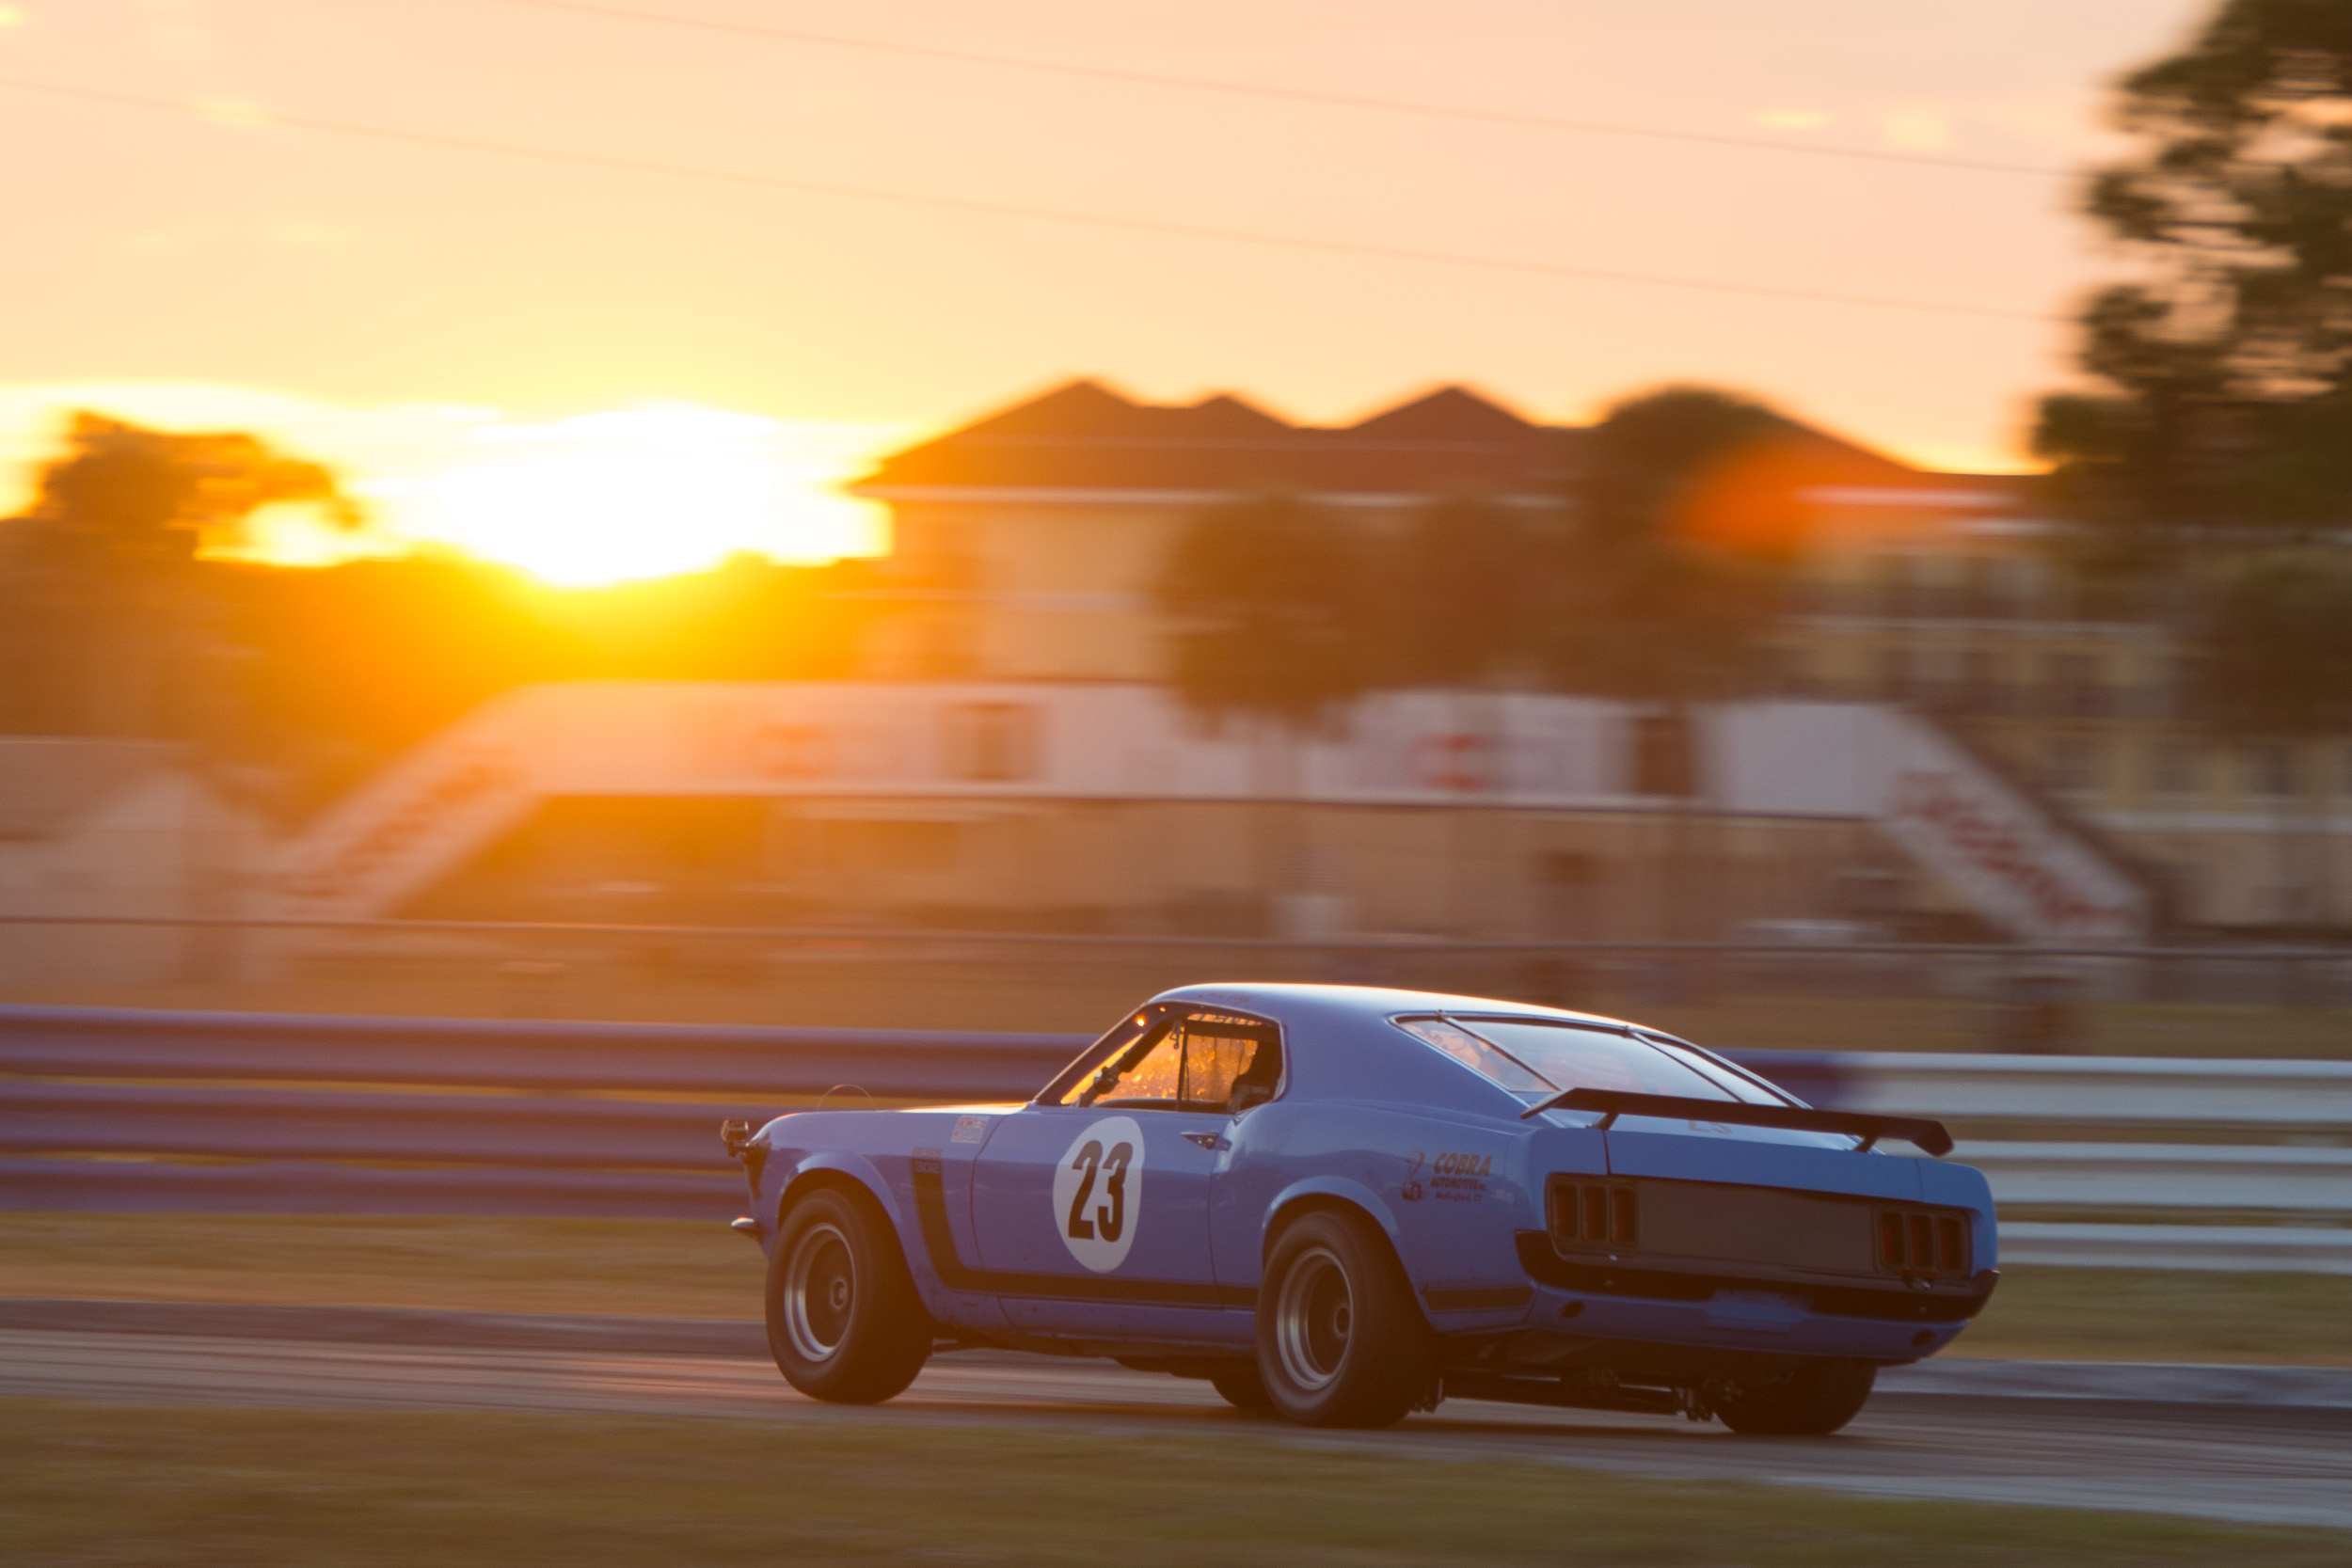 Autocross: Retro Ford Mustang equipped with a turbocharged engine and a safety roll cage, Rear spoiler. 2500x1670 HD Wallpaper.